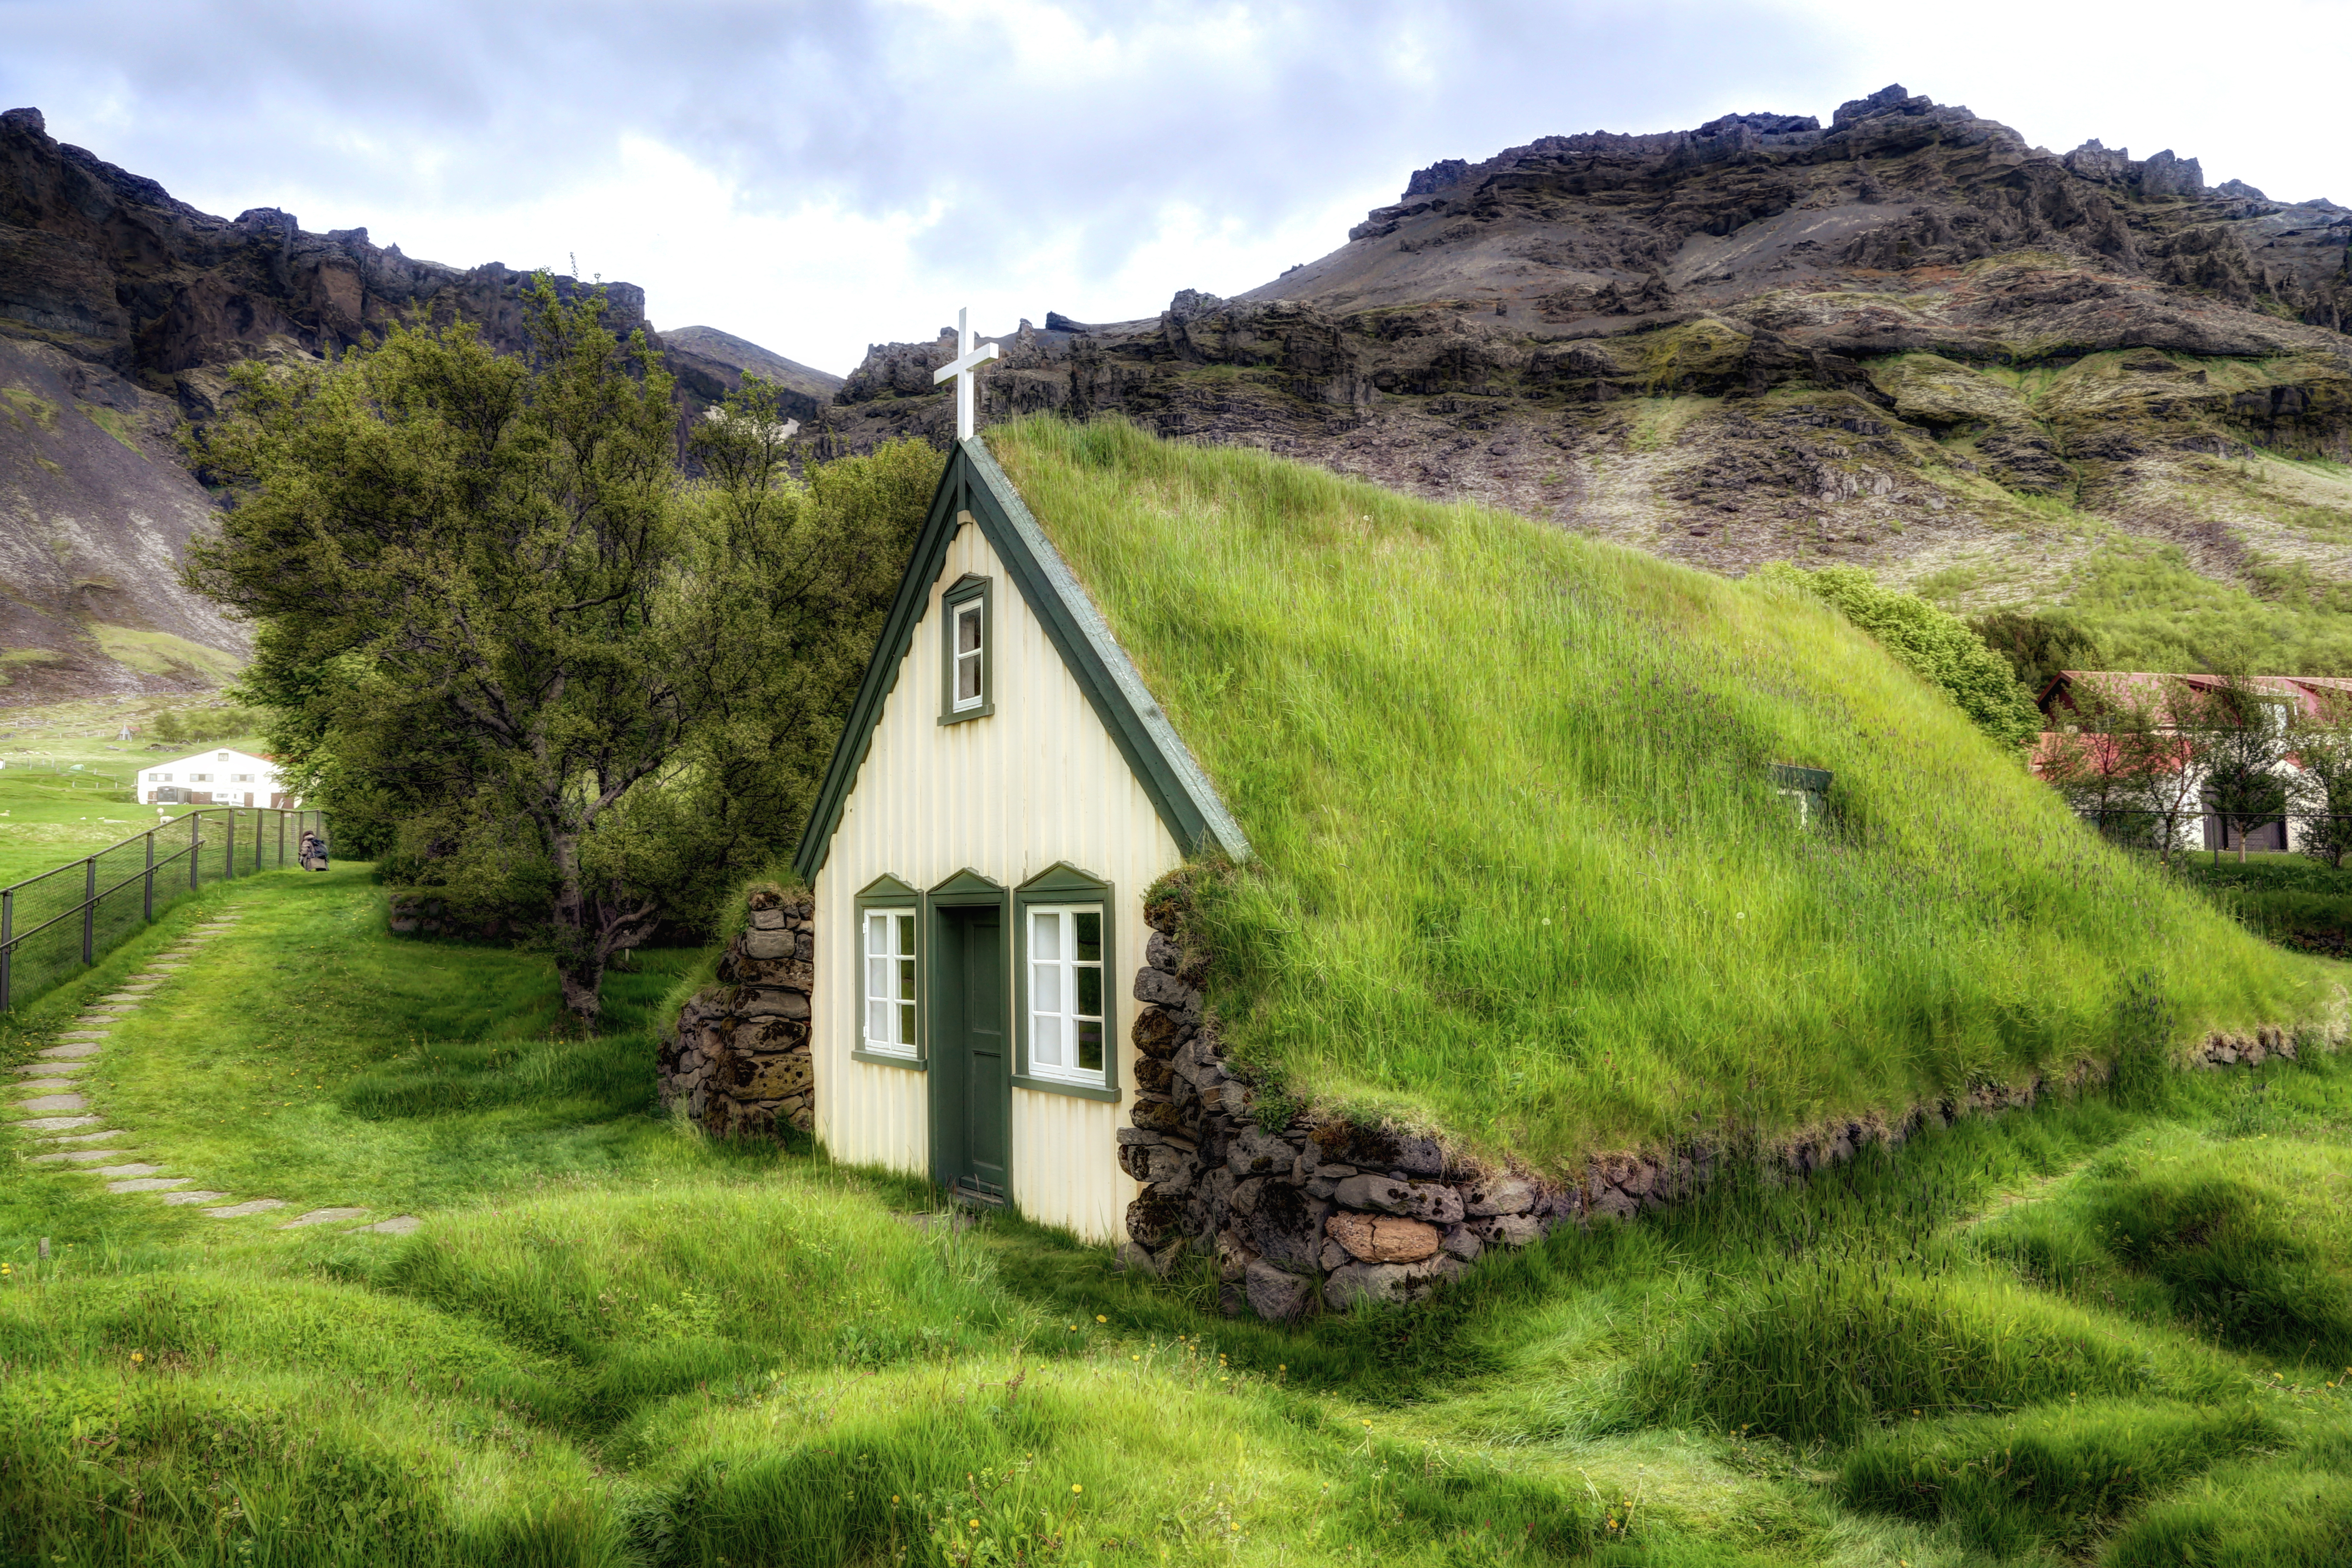 Church Countryside Hdr Iceland Mountain 5459x3639